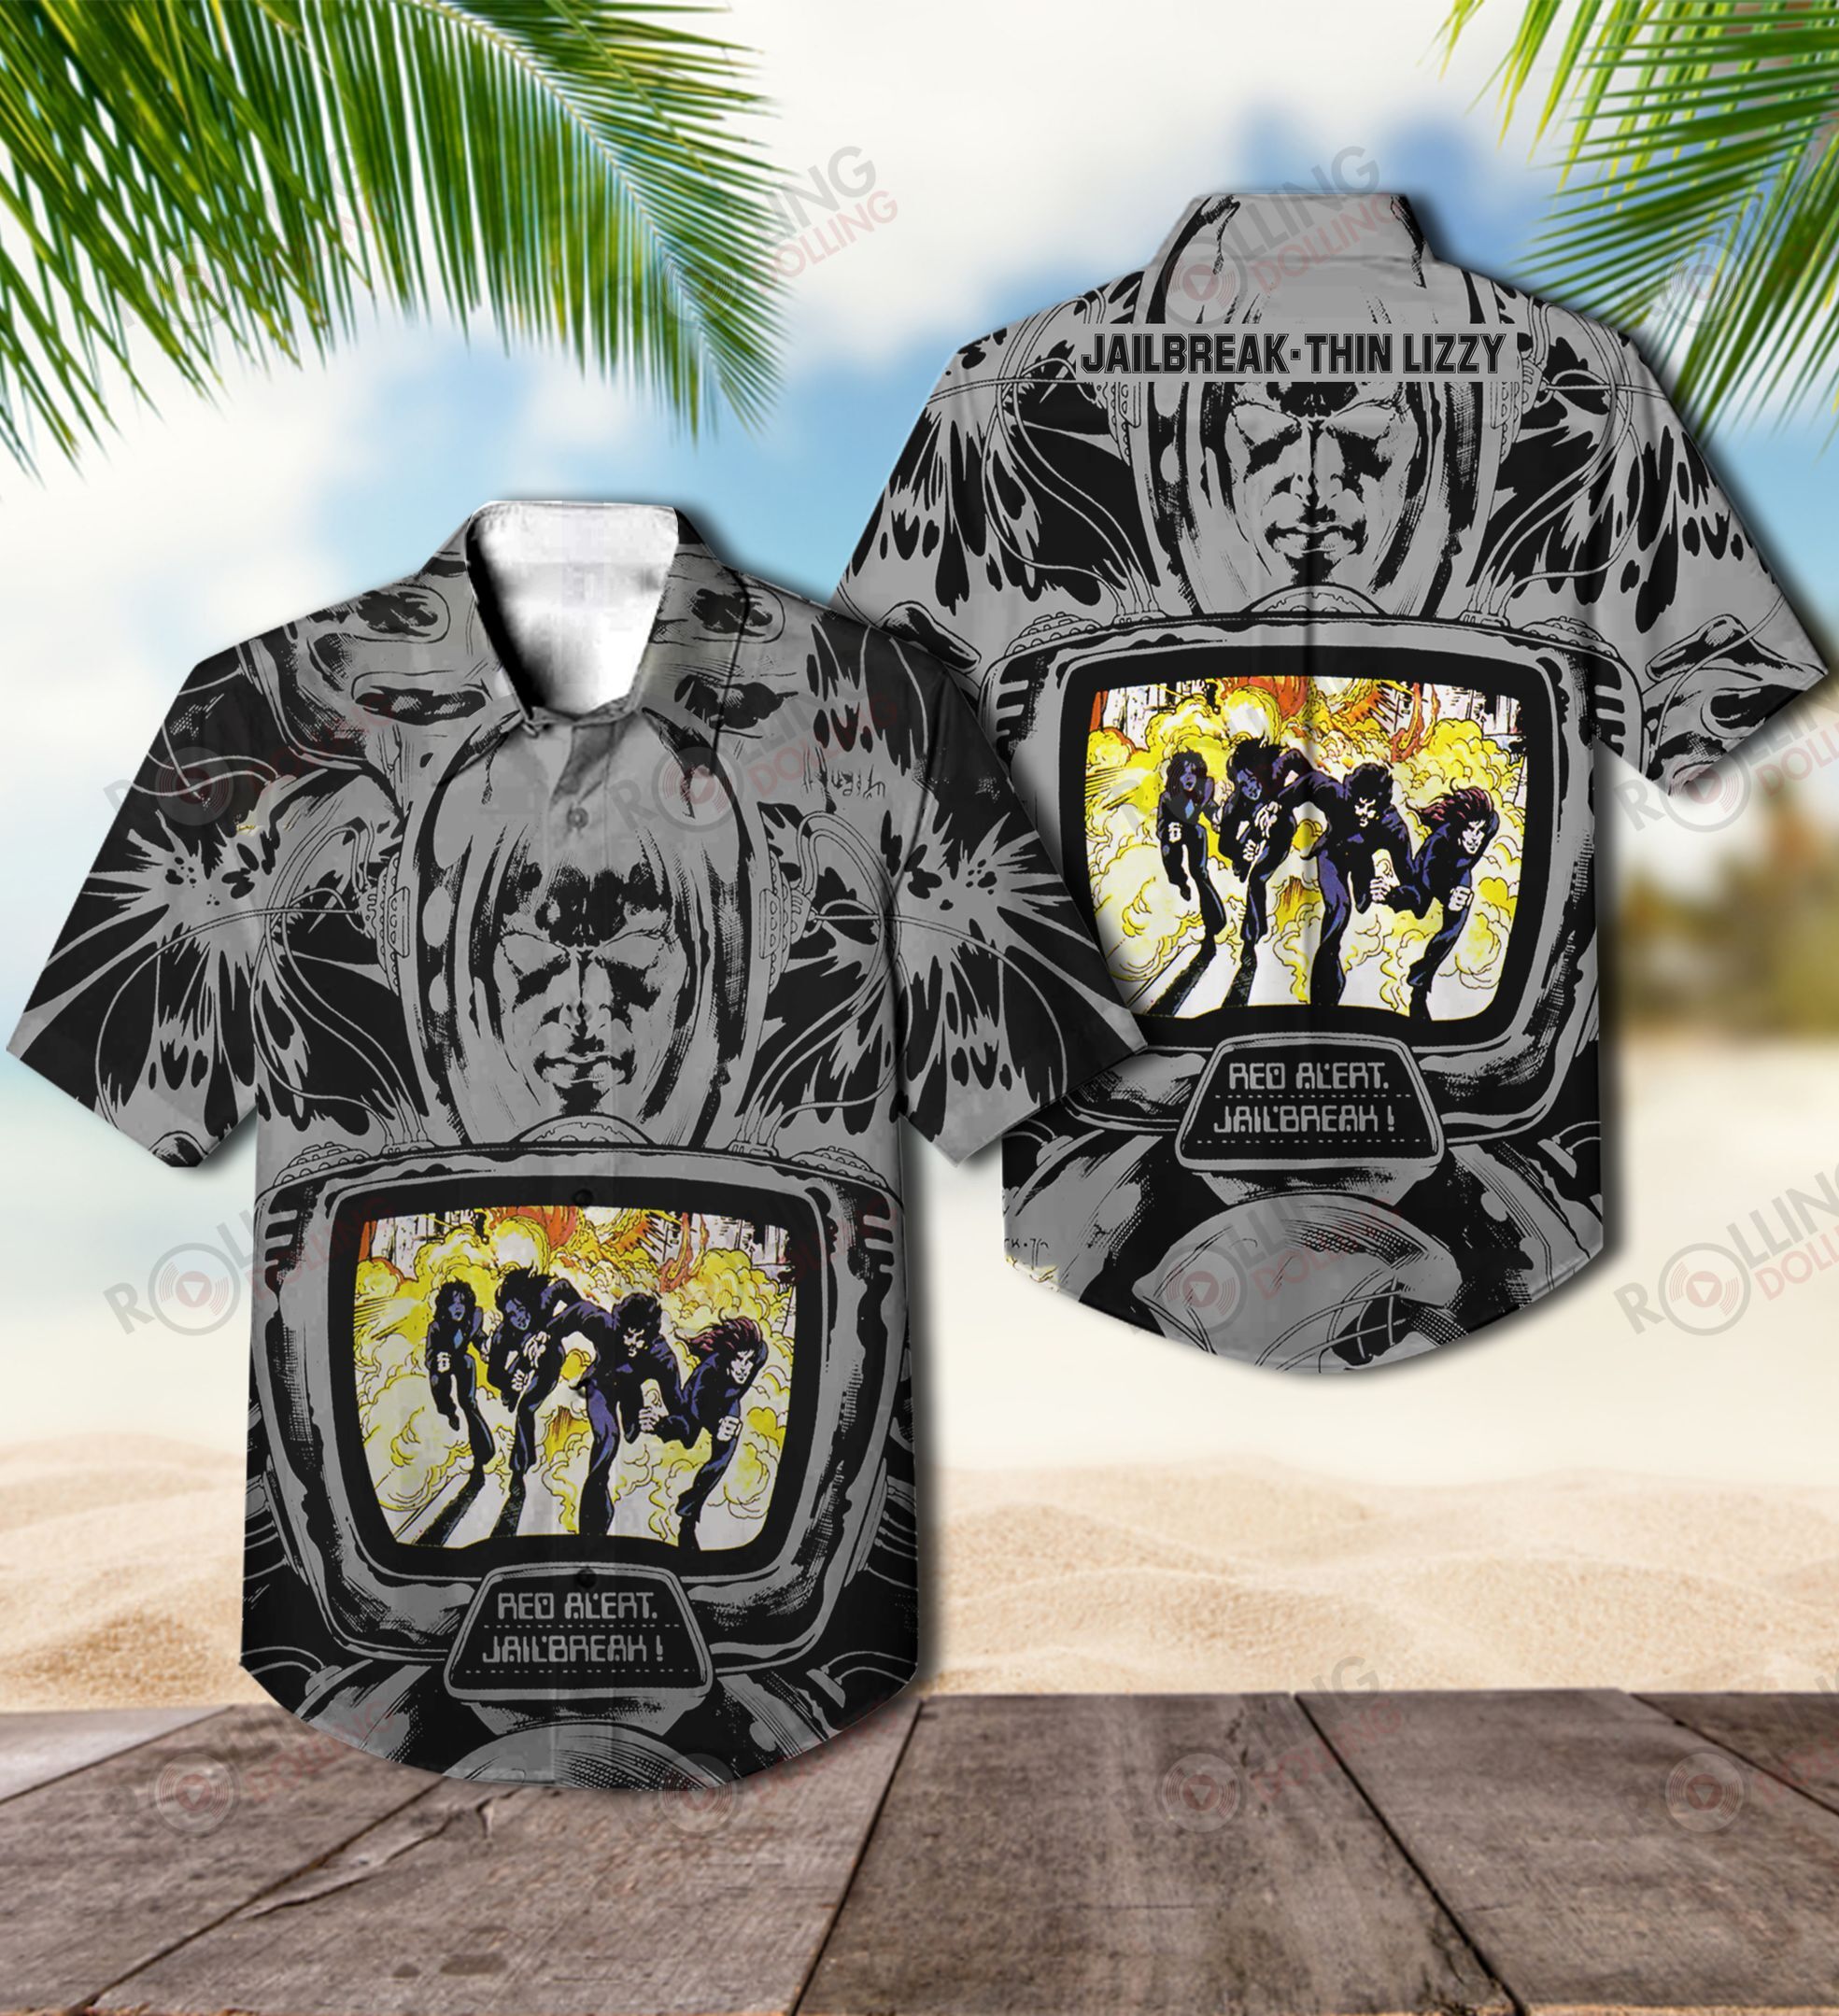 You'll have the perfect vacation outfit with this Hawaiian shirt 153